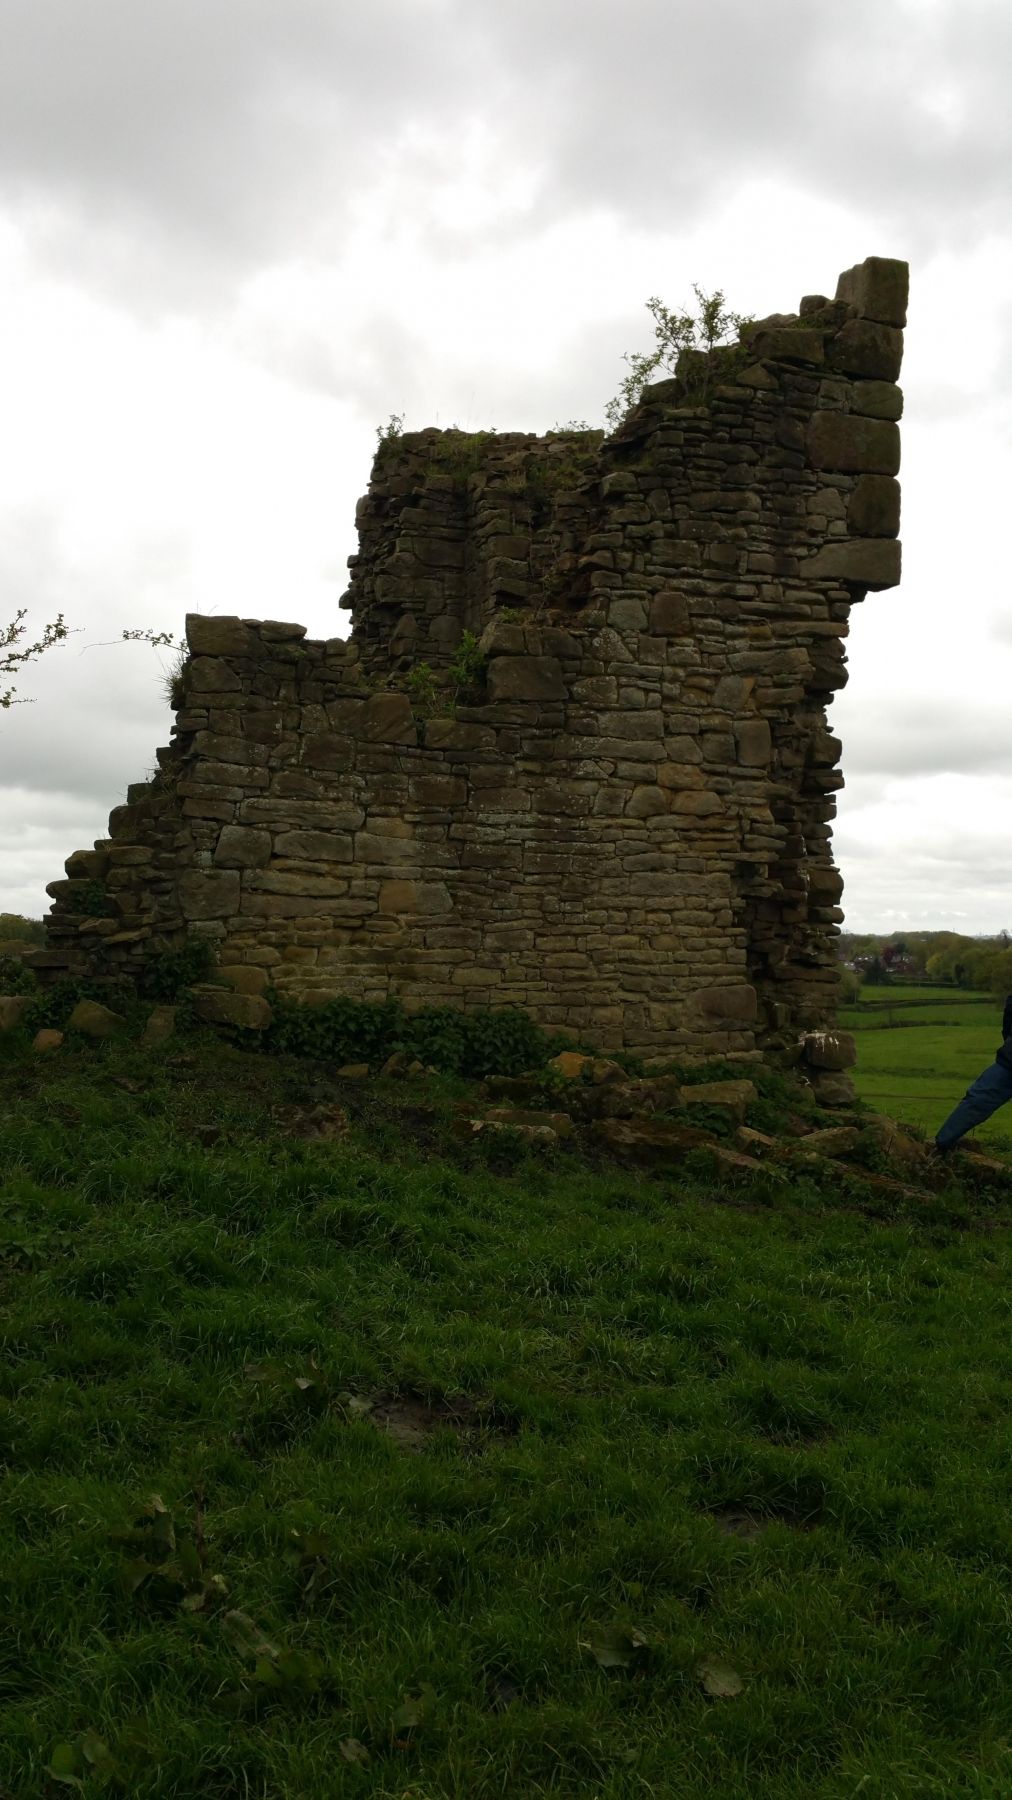 Ruins of Greenhalgh Castle (Image courtesy of Liz Cripps)